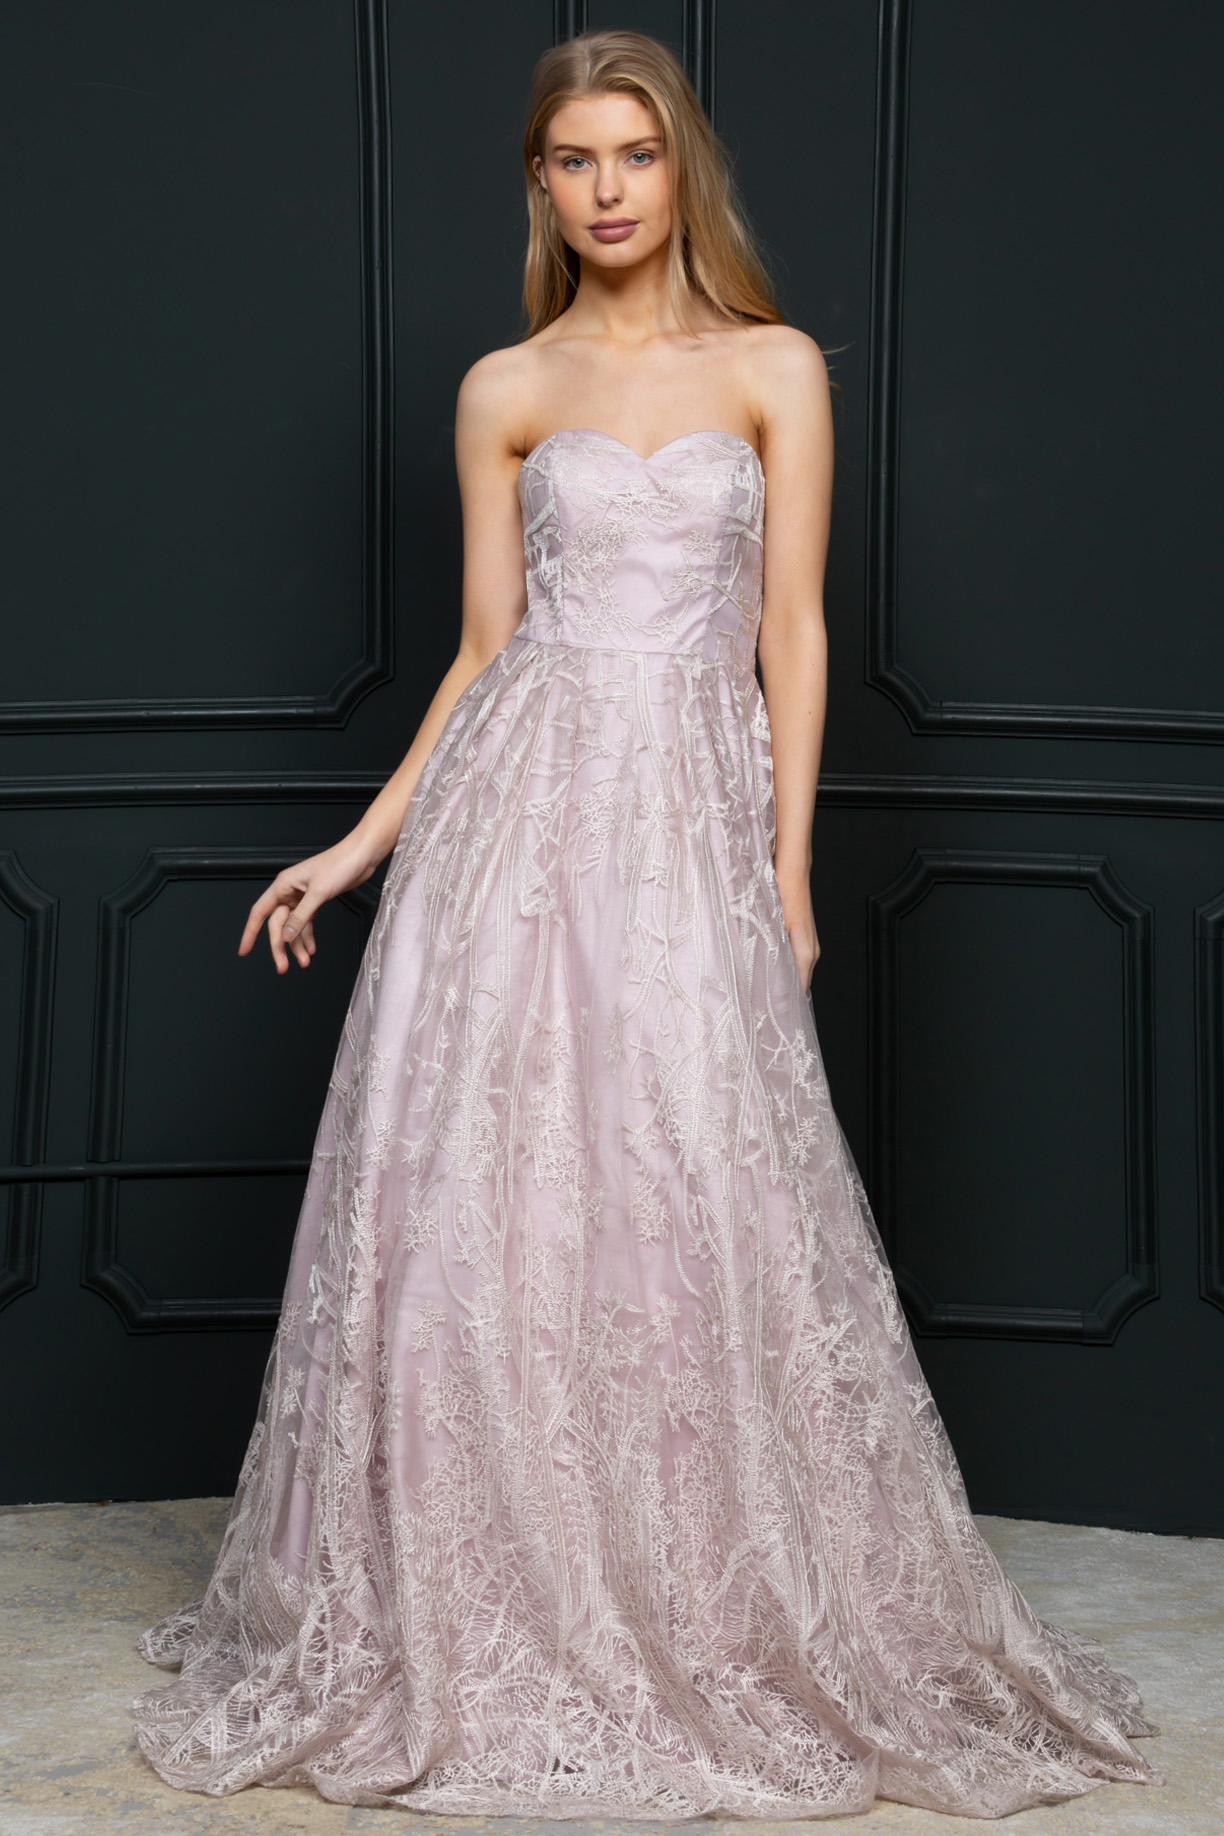 SWEETHEART NECK, STRAPLESS, A-LINE